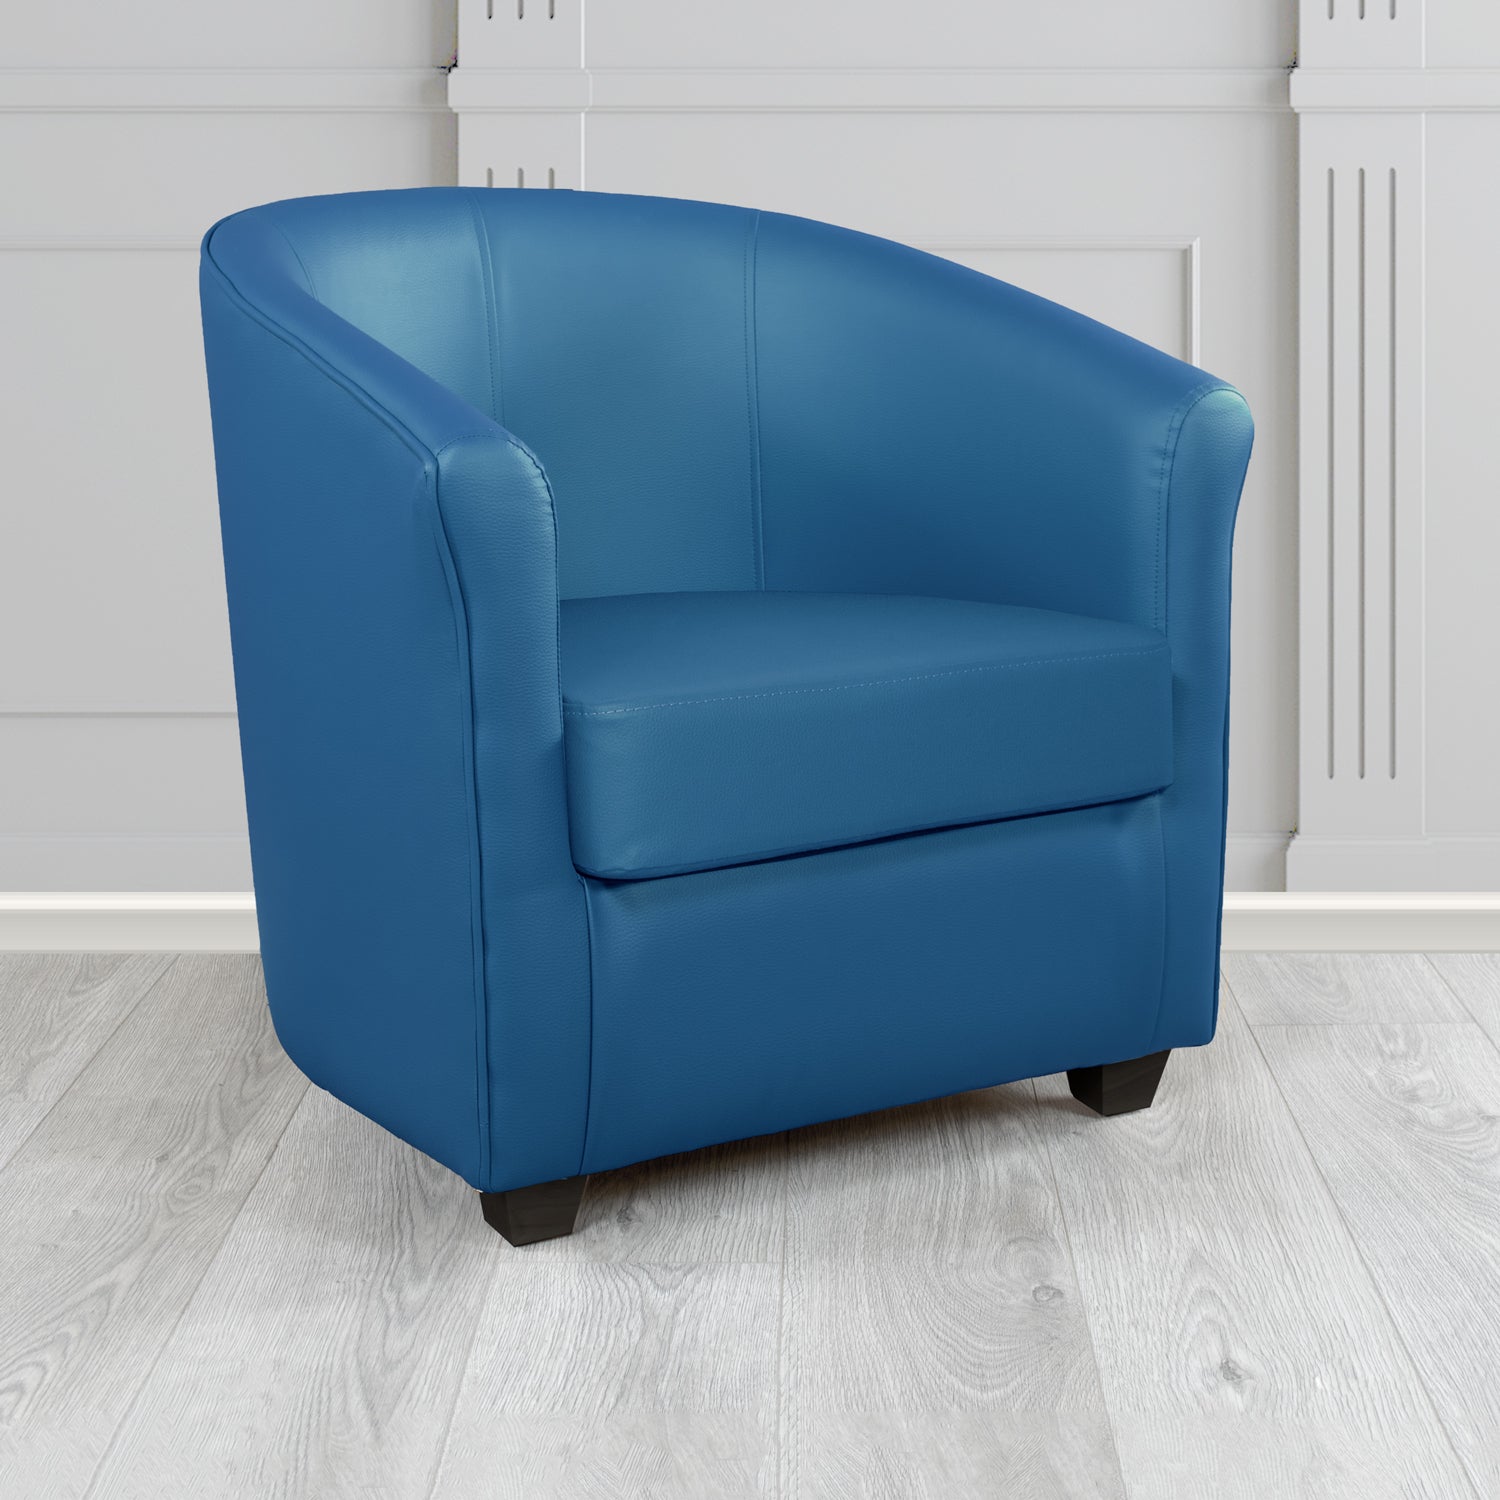 Cannes Tub Chair in Madrid Royal Faux Leather - The Tub Chair Shop